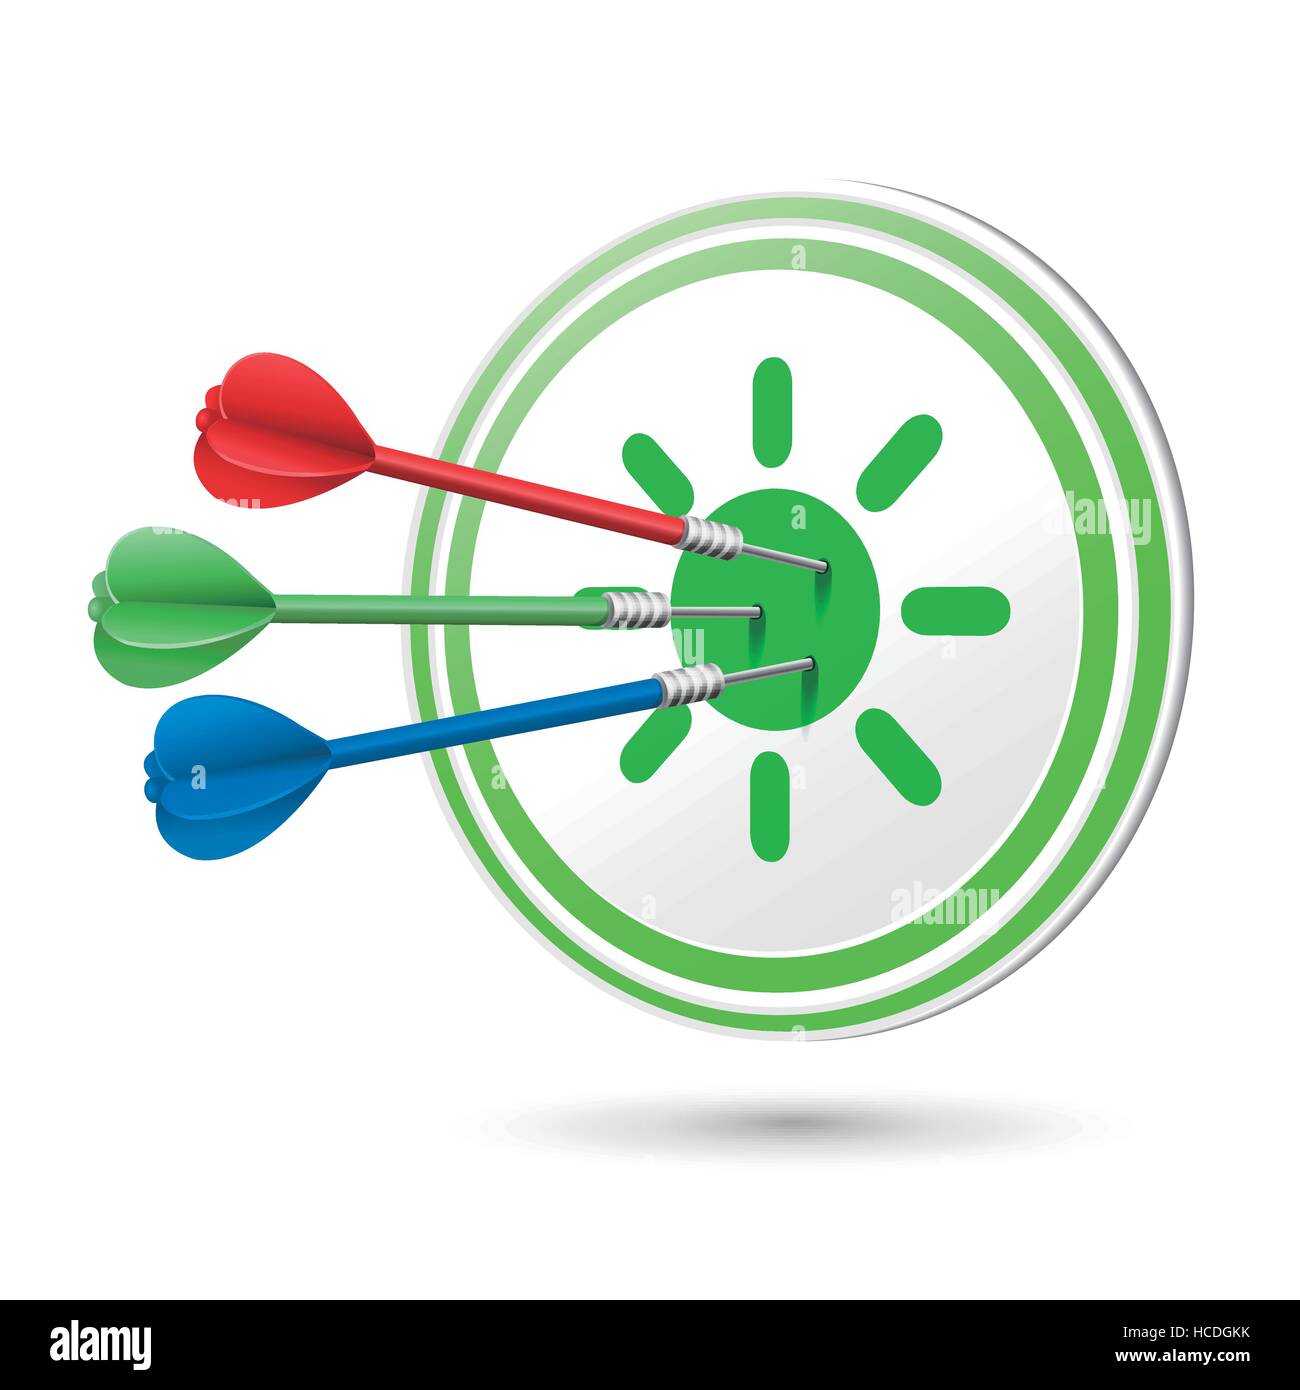 sun icon target with darts hitting on it over white Stock Vector